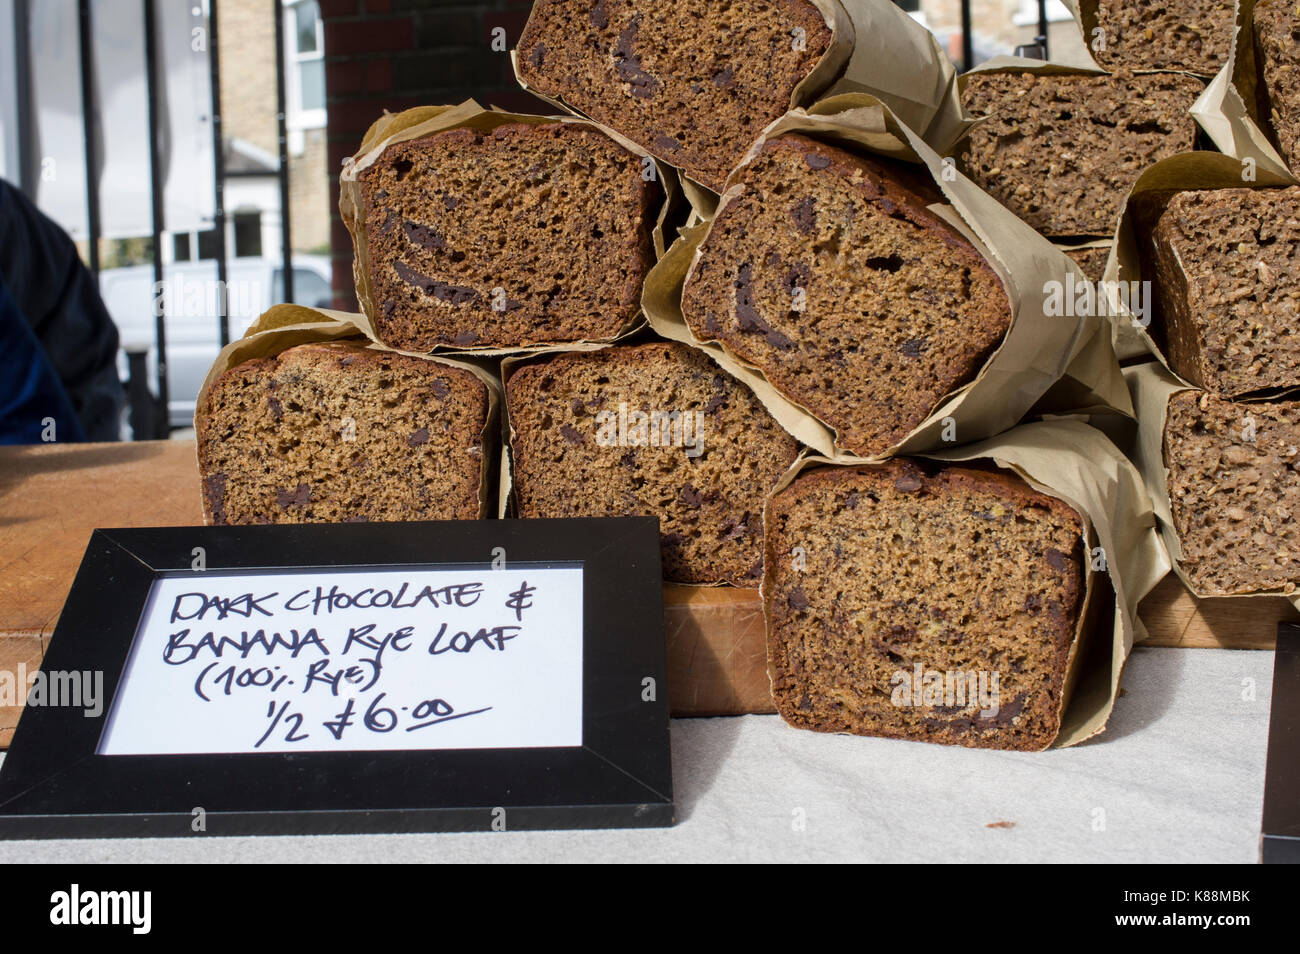 Dark chocolate and banana rye loaf breads in an outdoor market in London Stock Photo